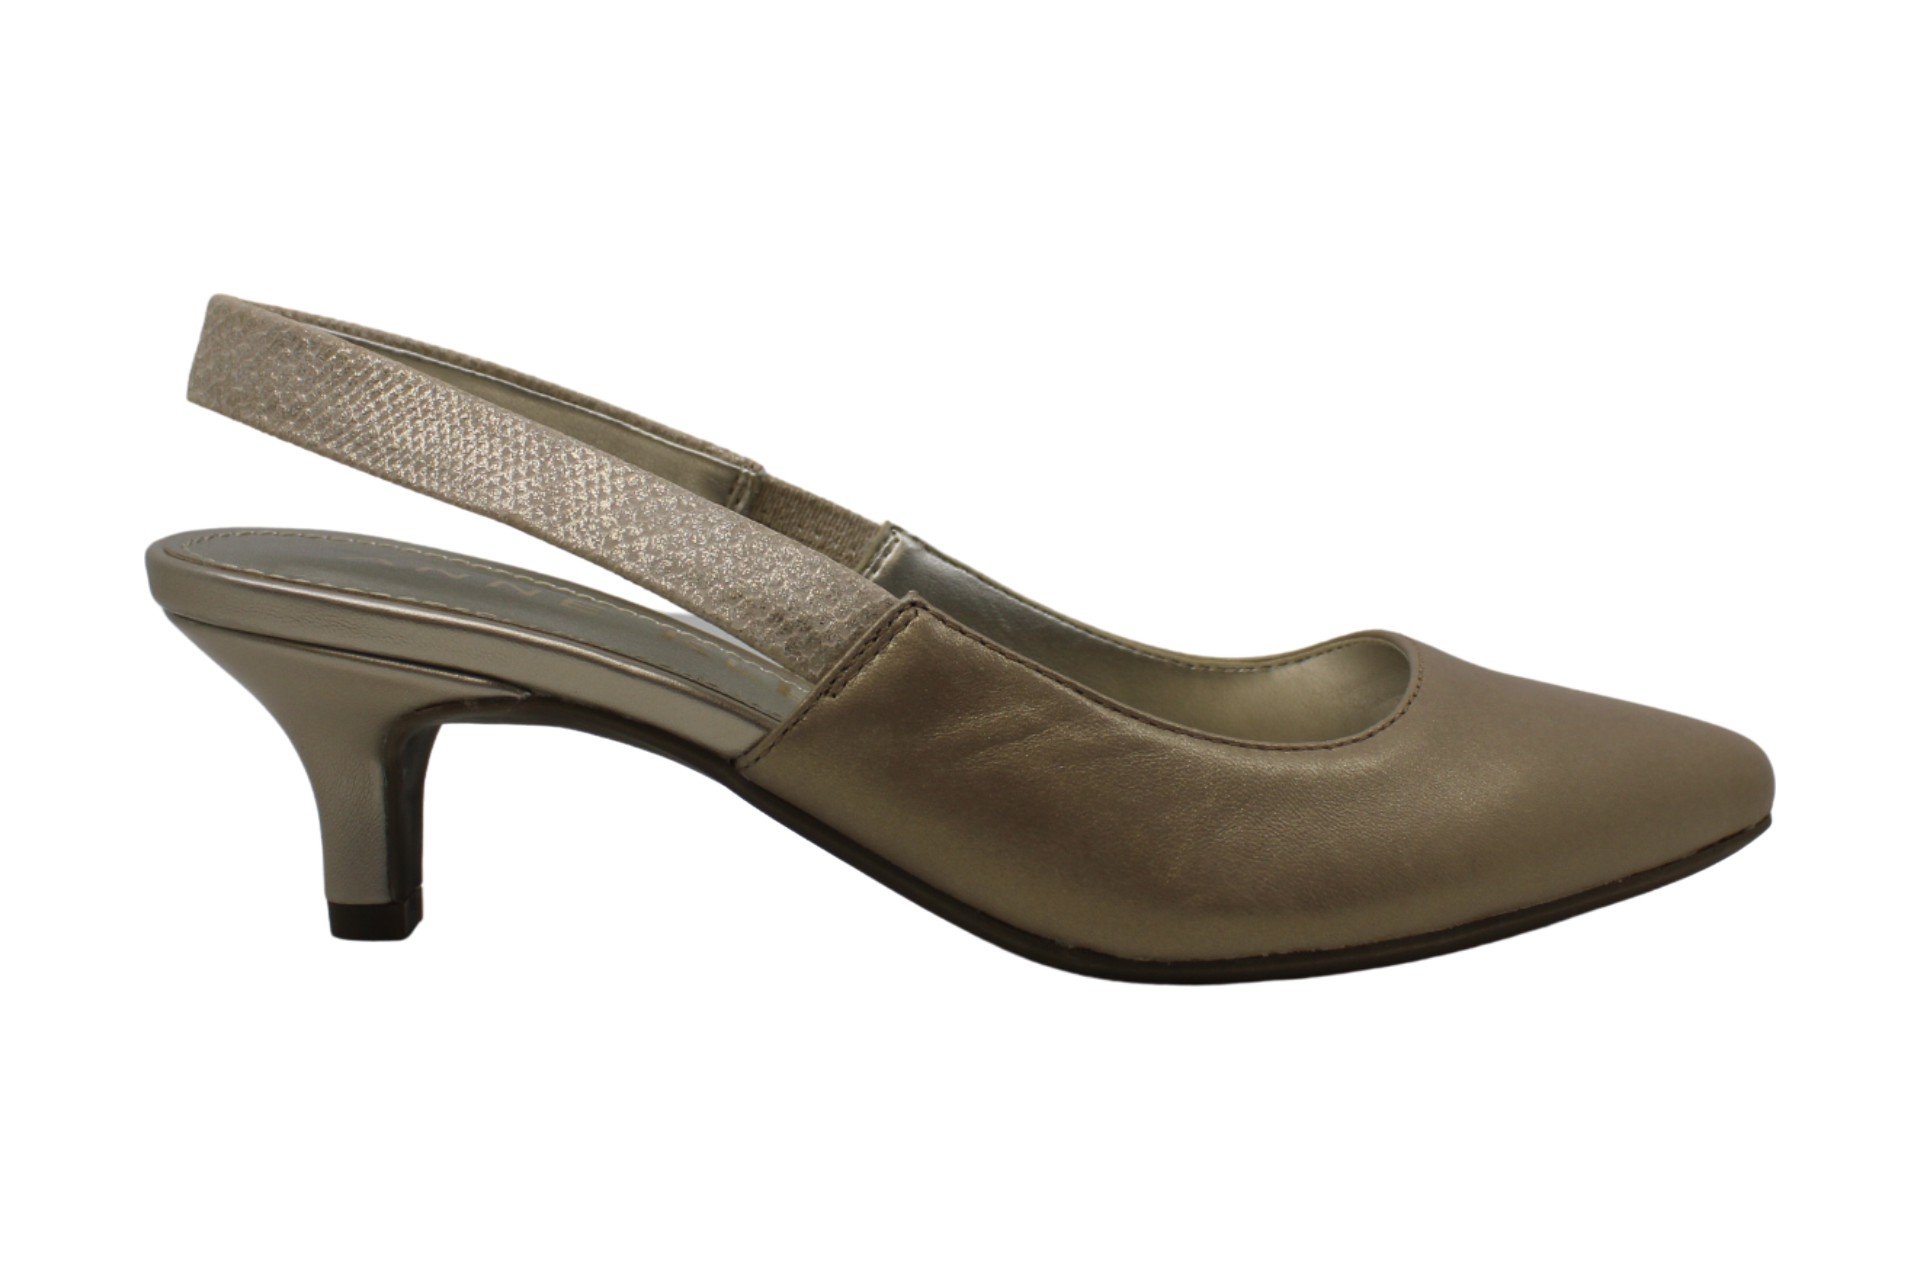 ANNE KLEIN WOMENS kaileen Pointed Toe SlingBack Classic Pumps $45.76